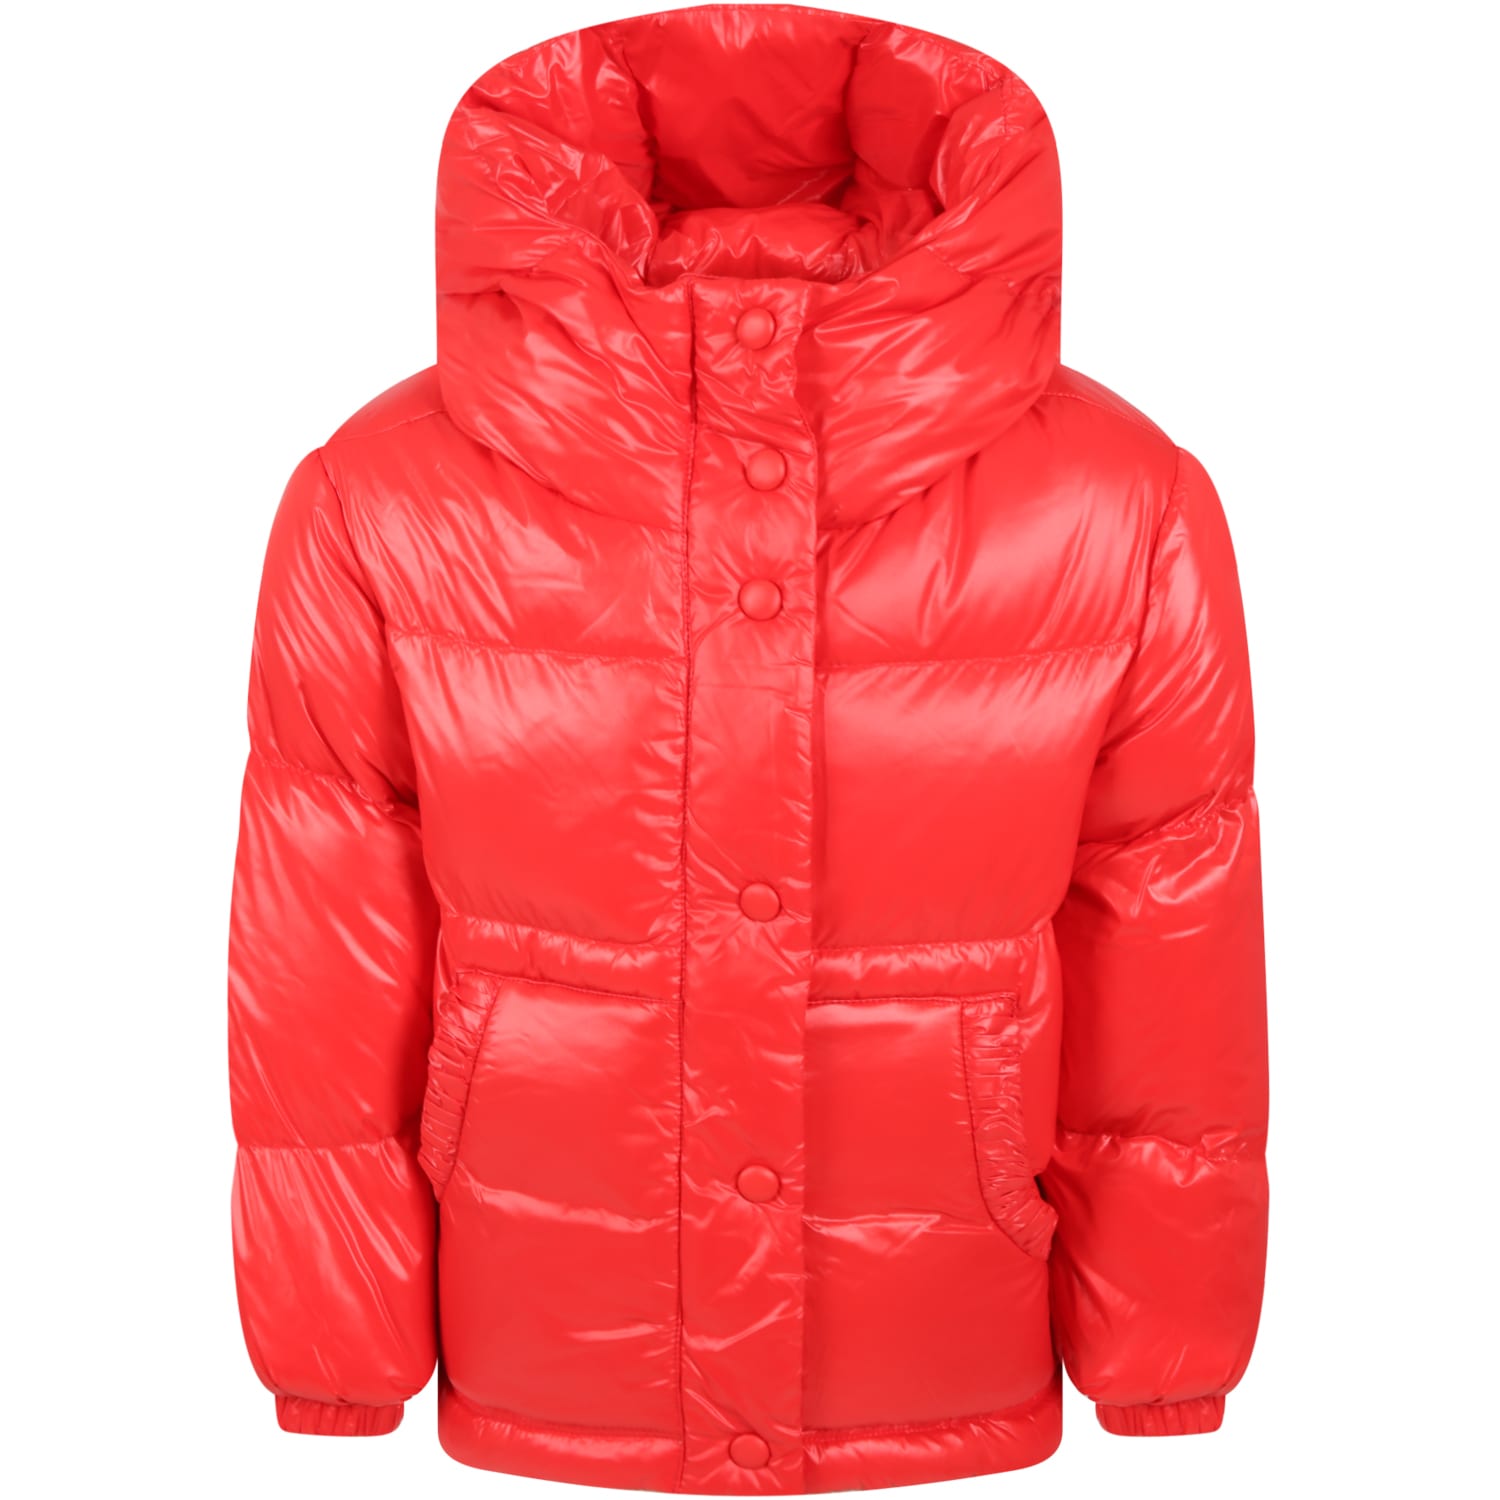 Add Kids' Red Jacket For Girl With Logo